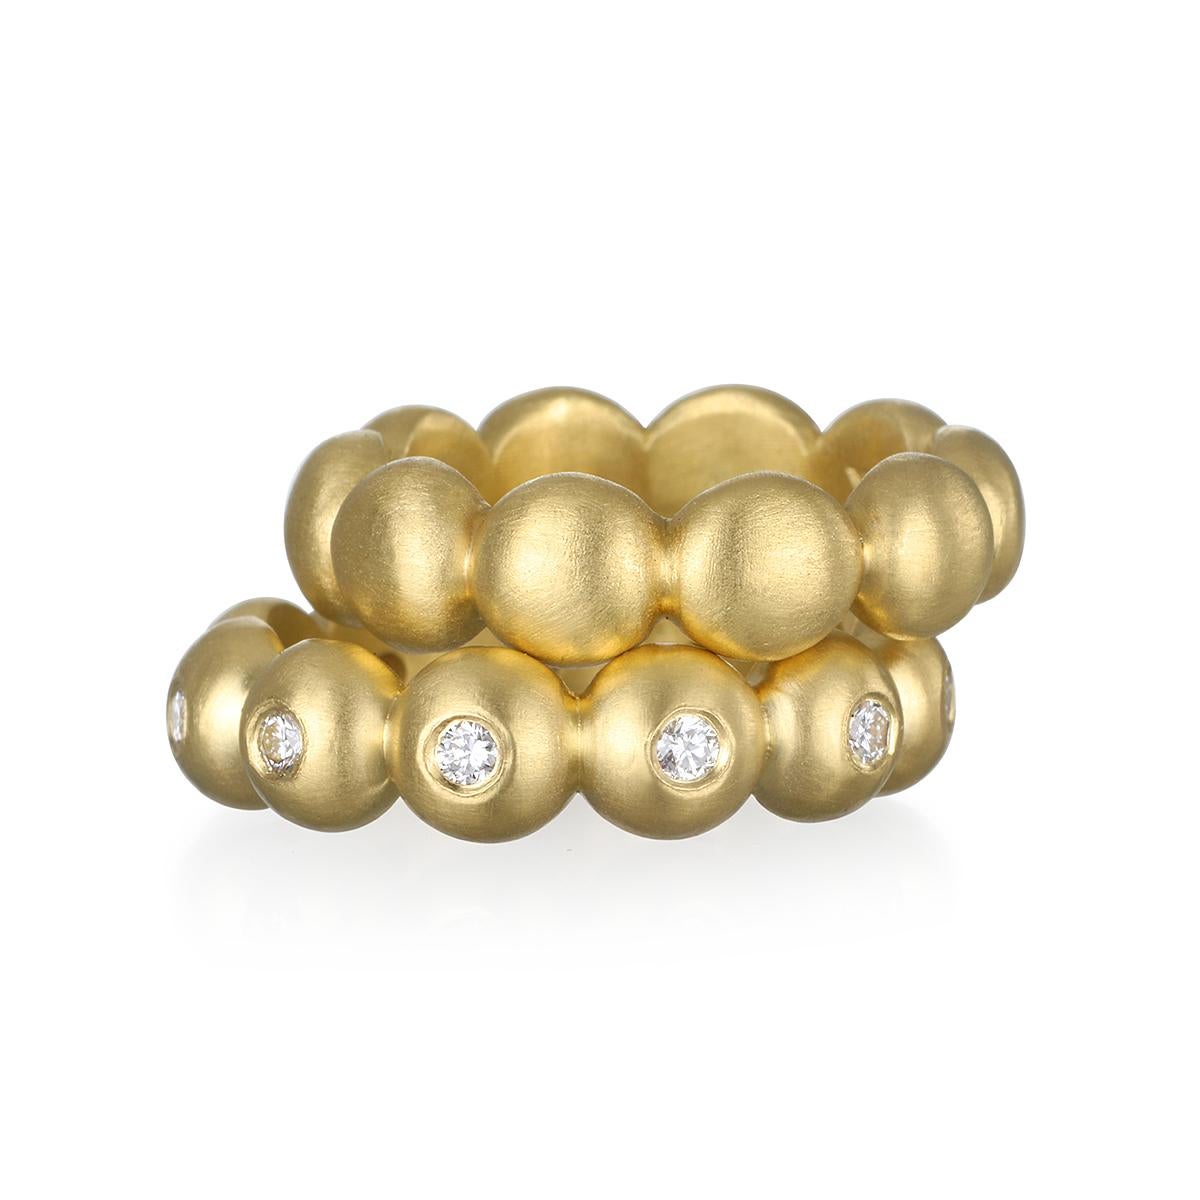 Part of Faye Kim's signature collection, this 18 Karat Gold Large Granulation Bead Ring is matte finished for a clean, contemporary look. Perfect for stacking with other rings or wearing alone.

Width of granulation bubbles .25